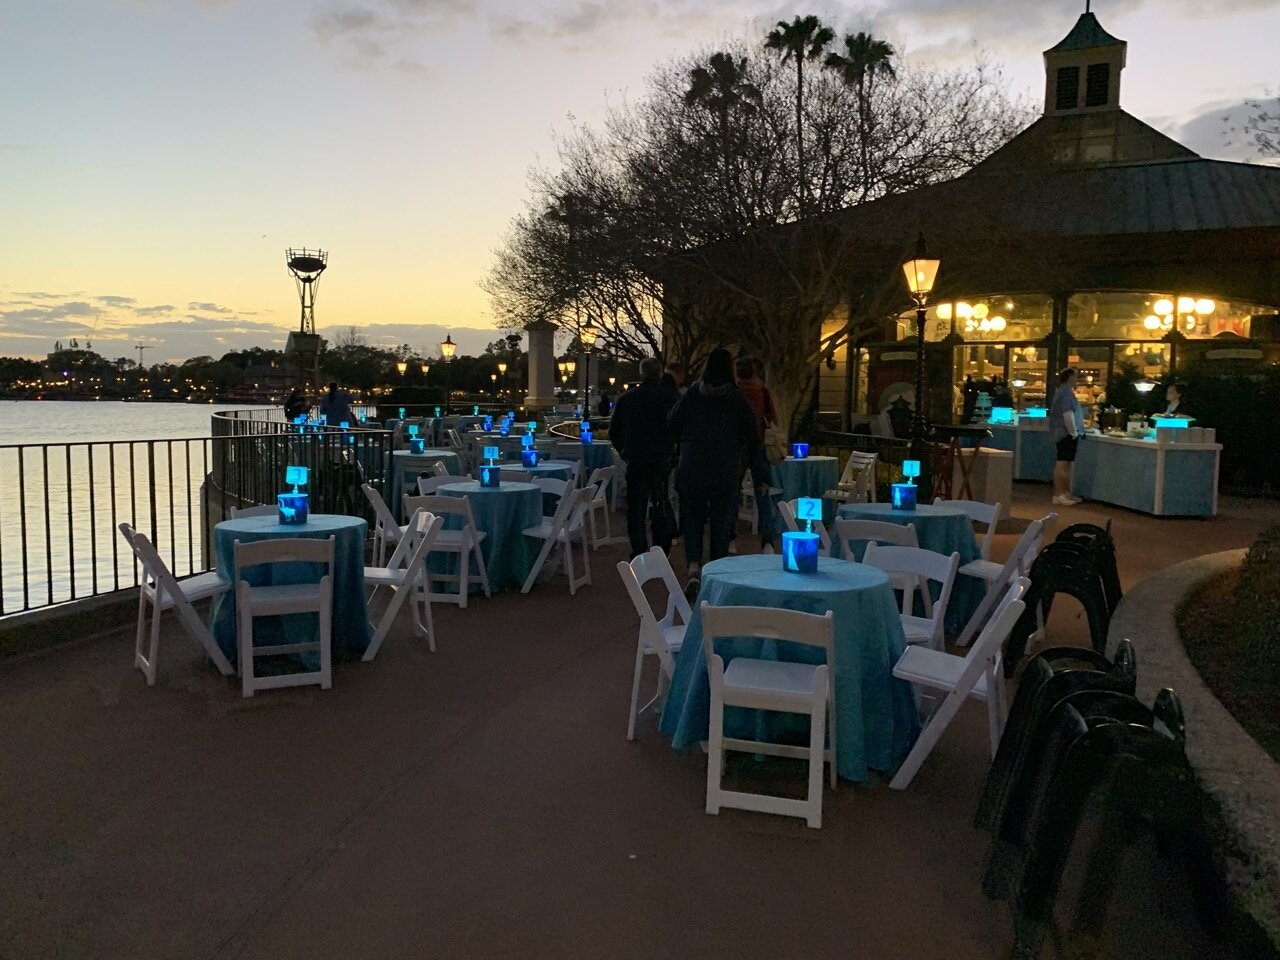 frozen ever after dessert party epcot seating 02.jpeg